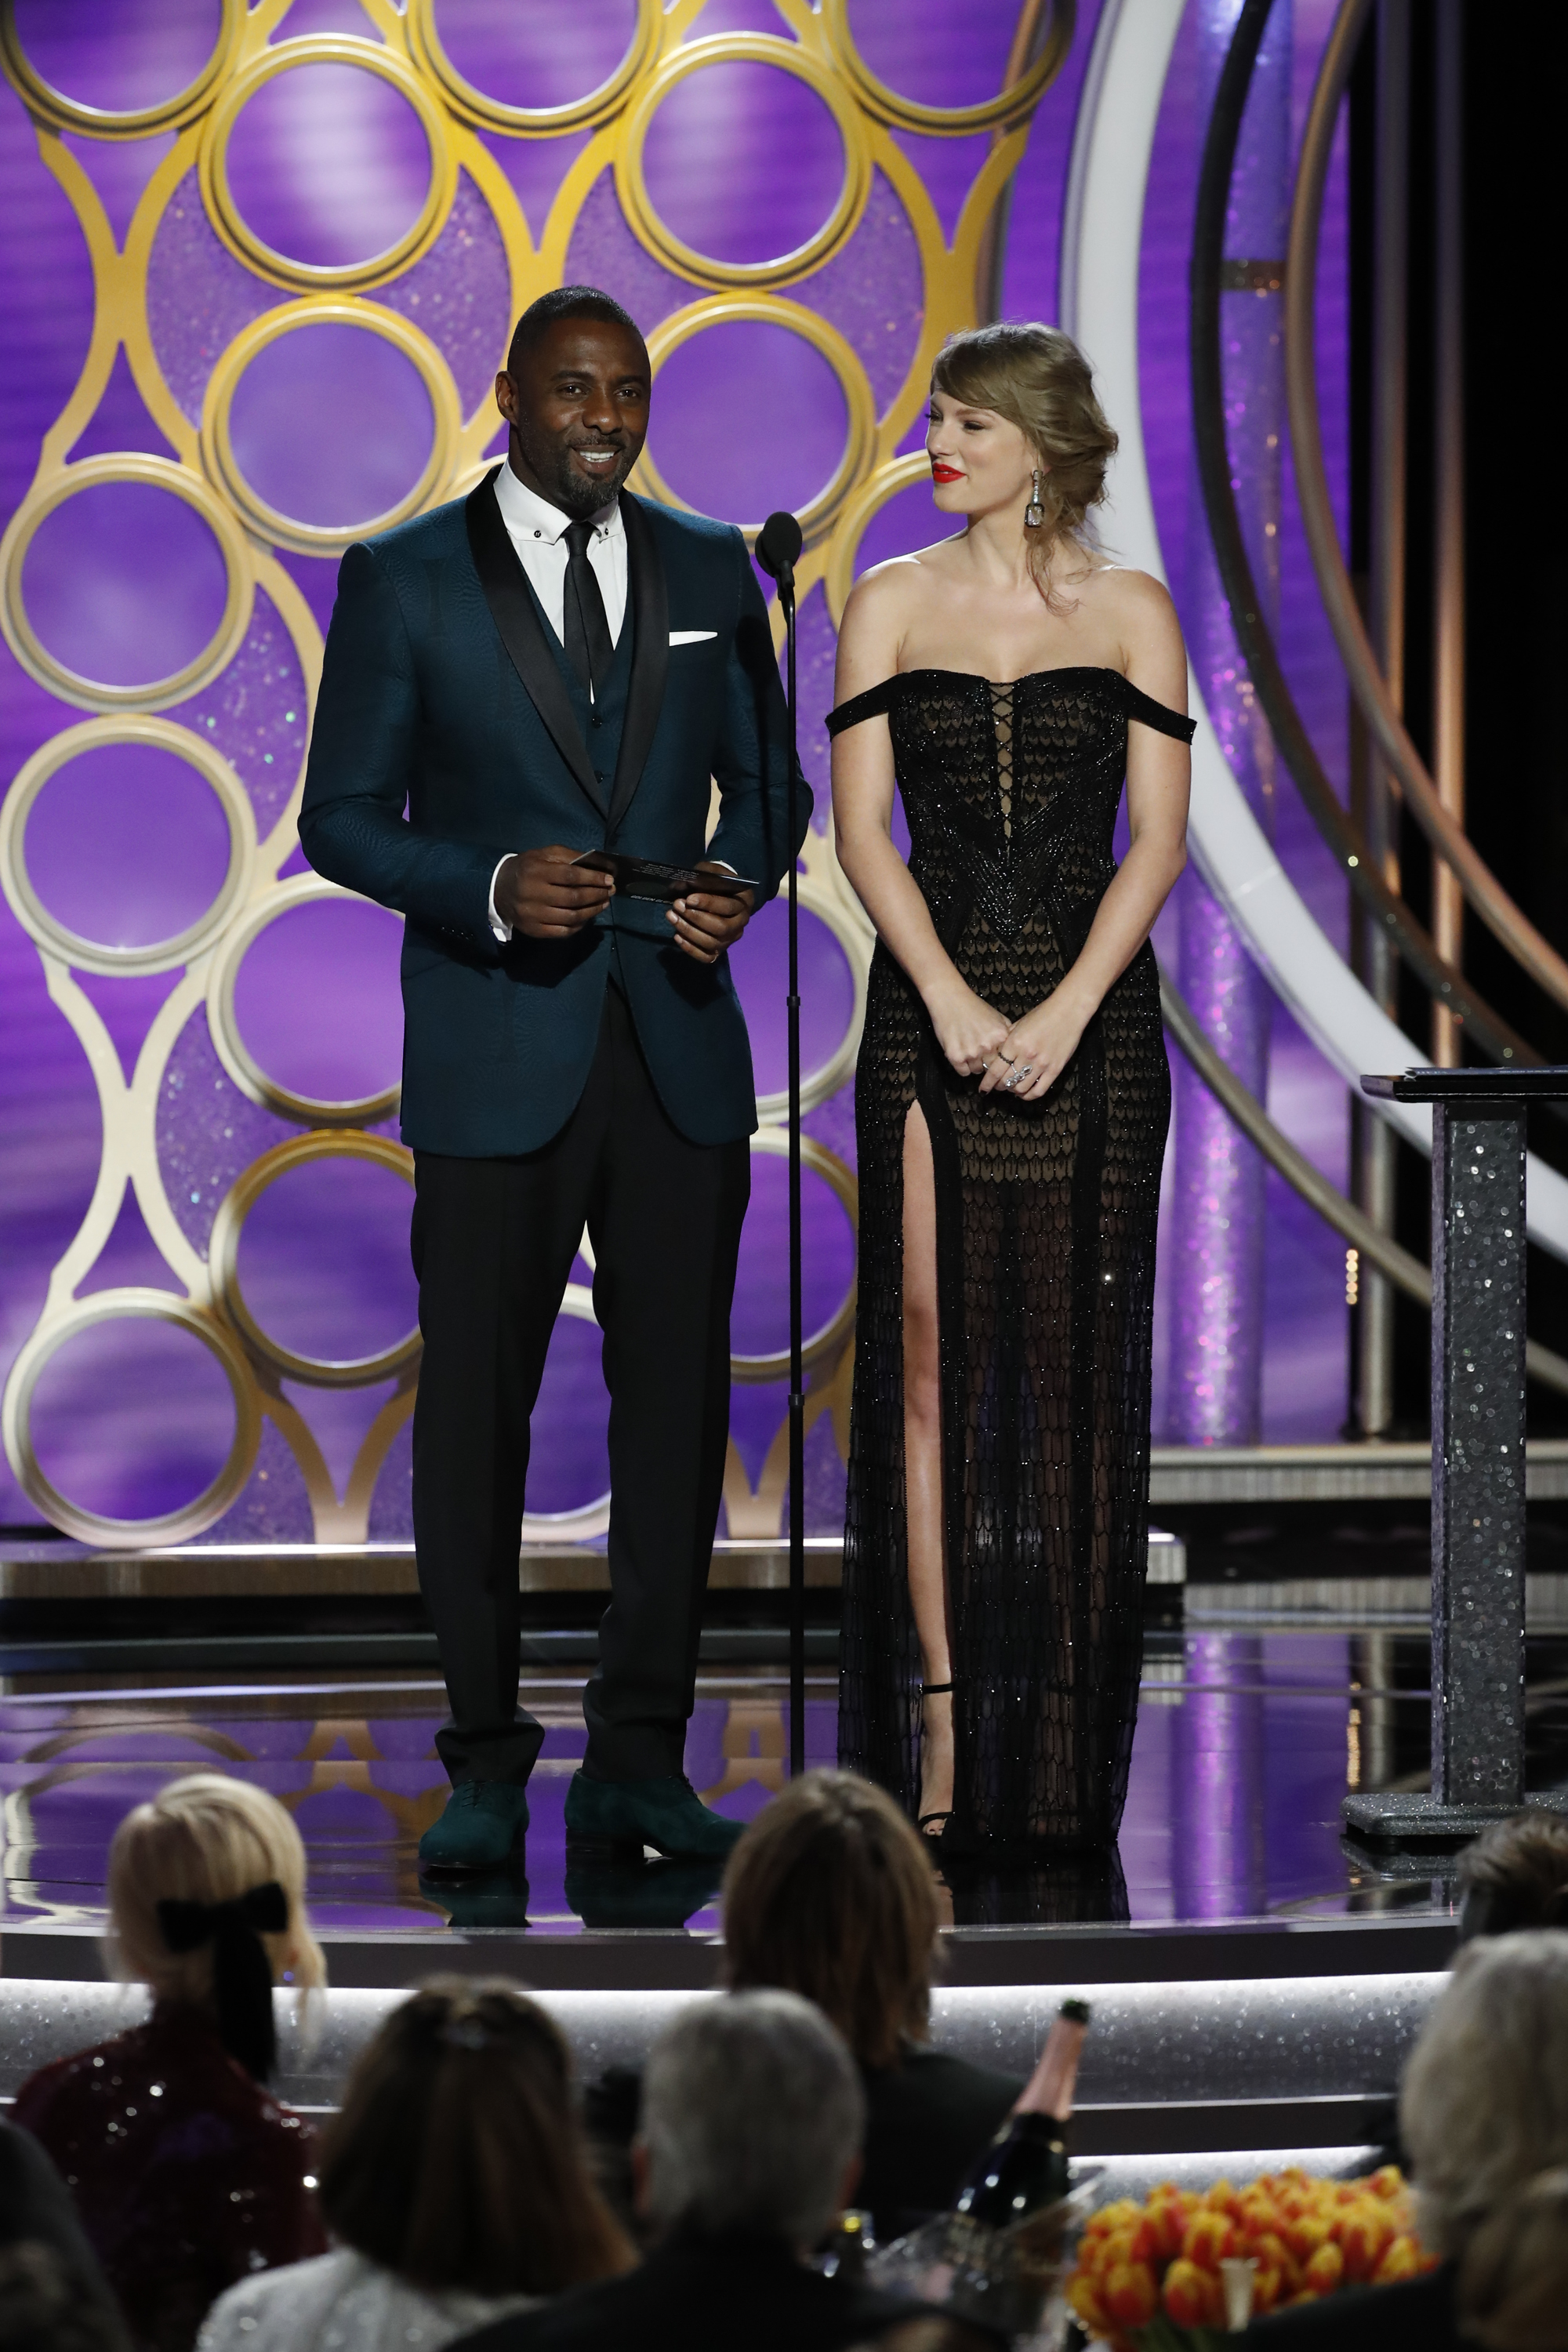 Presenters Taylor Swift and Idris Elba speak onstage during the 76th Annual Golden Globe Awards at The Beverly Hilton Hotel on January 06, 2019 in Beverly Hills, California. (Handout/NBCUniversal—Getty Images)